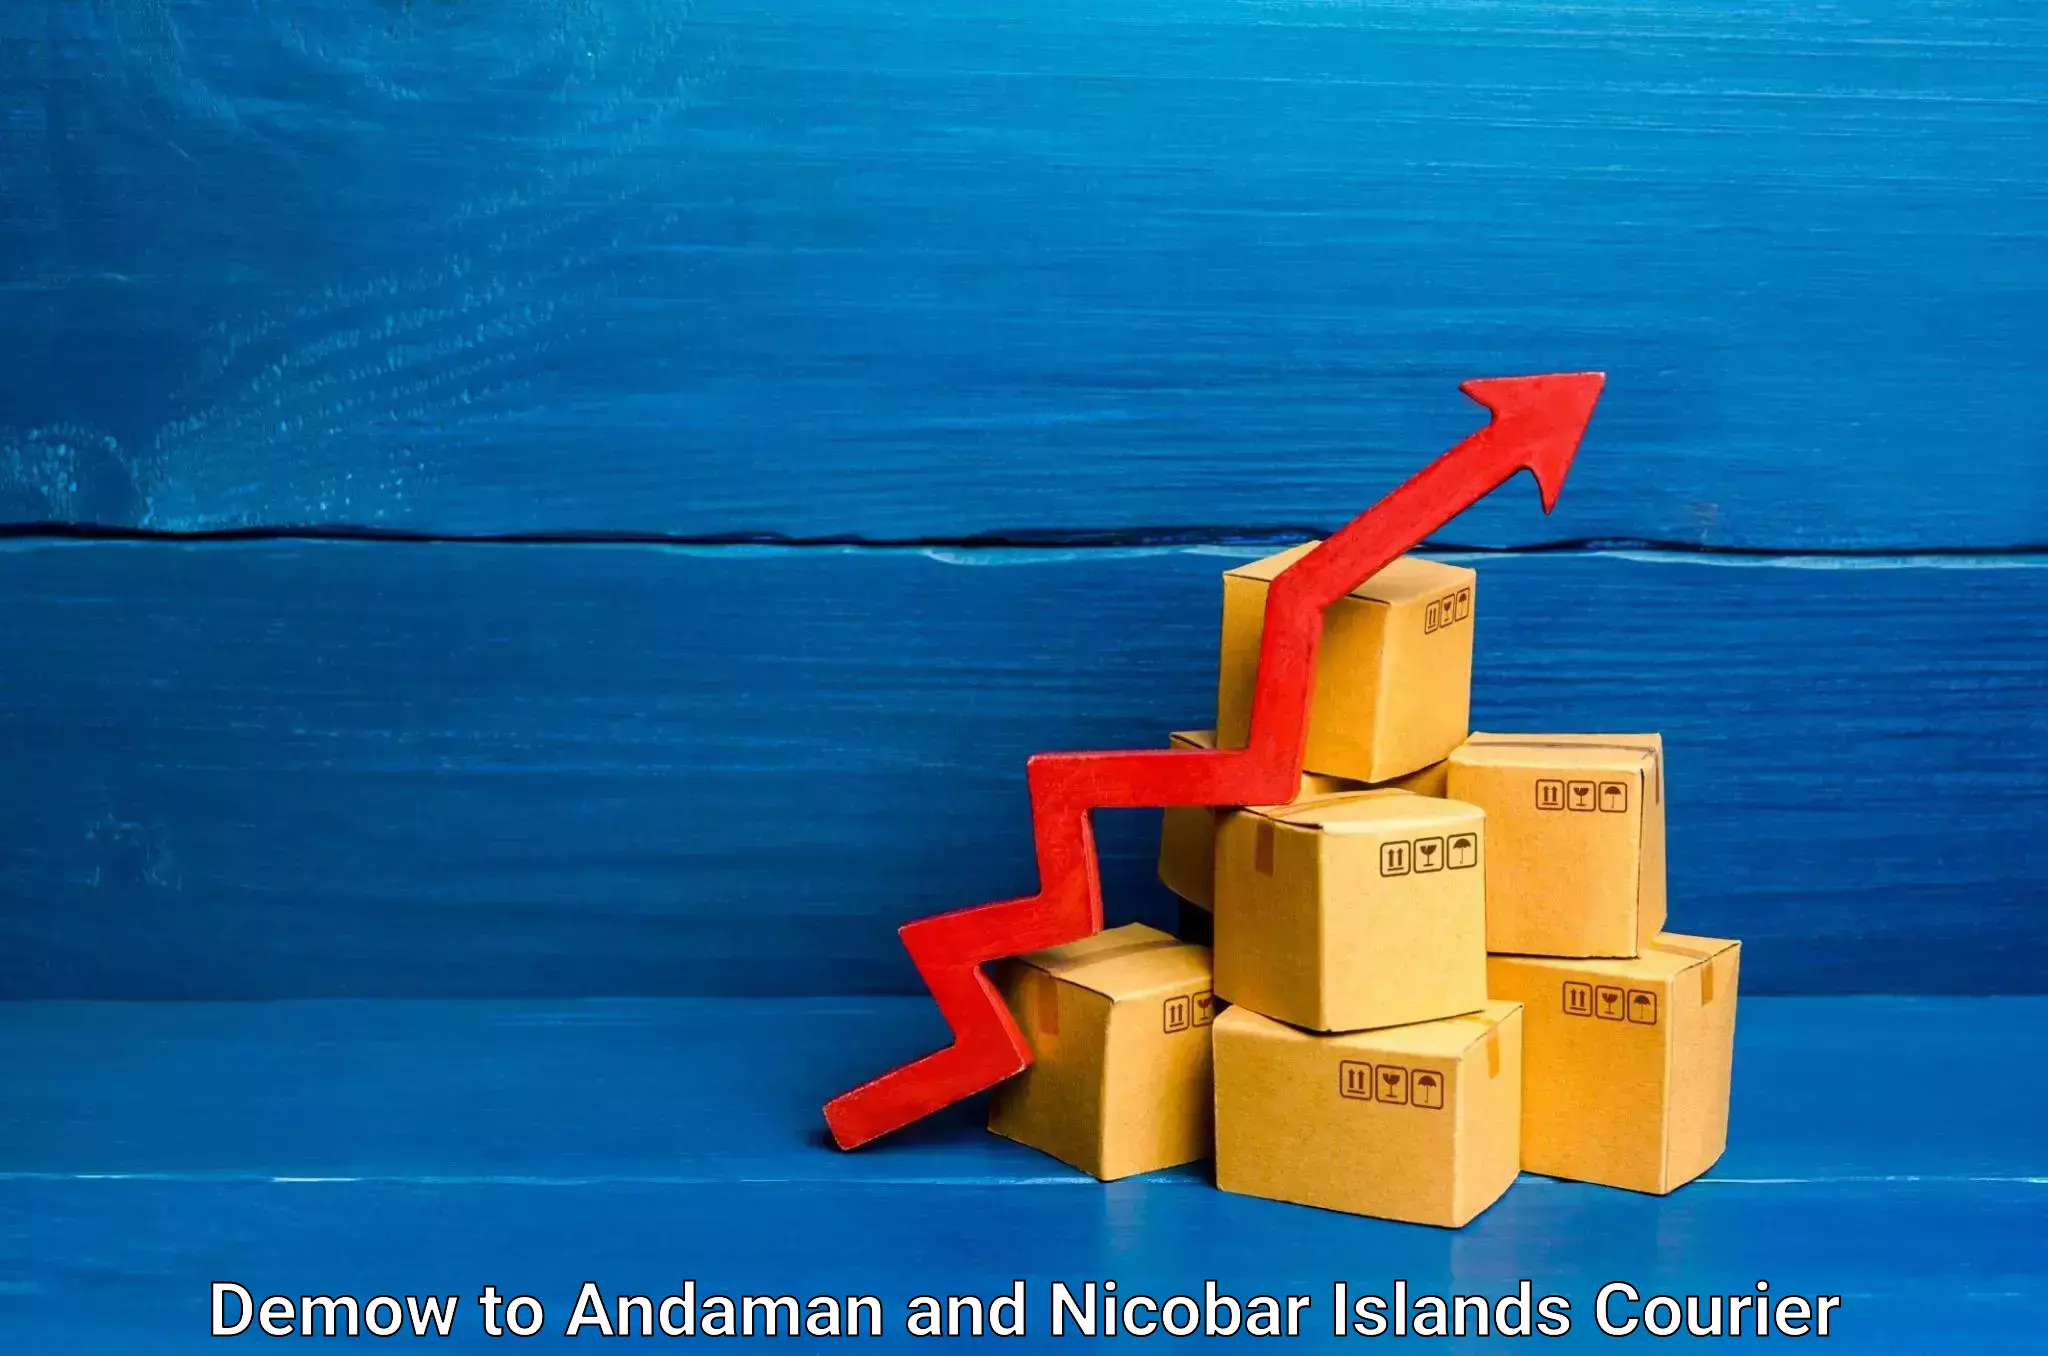 Delivery service partnership Demow to Andaman and Nicobar Islands